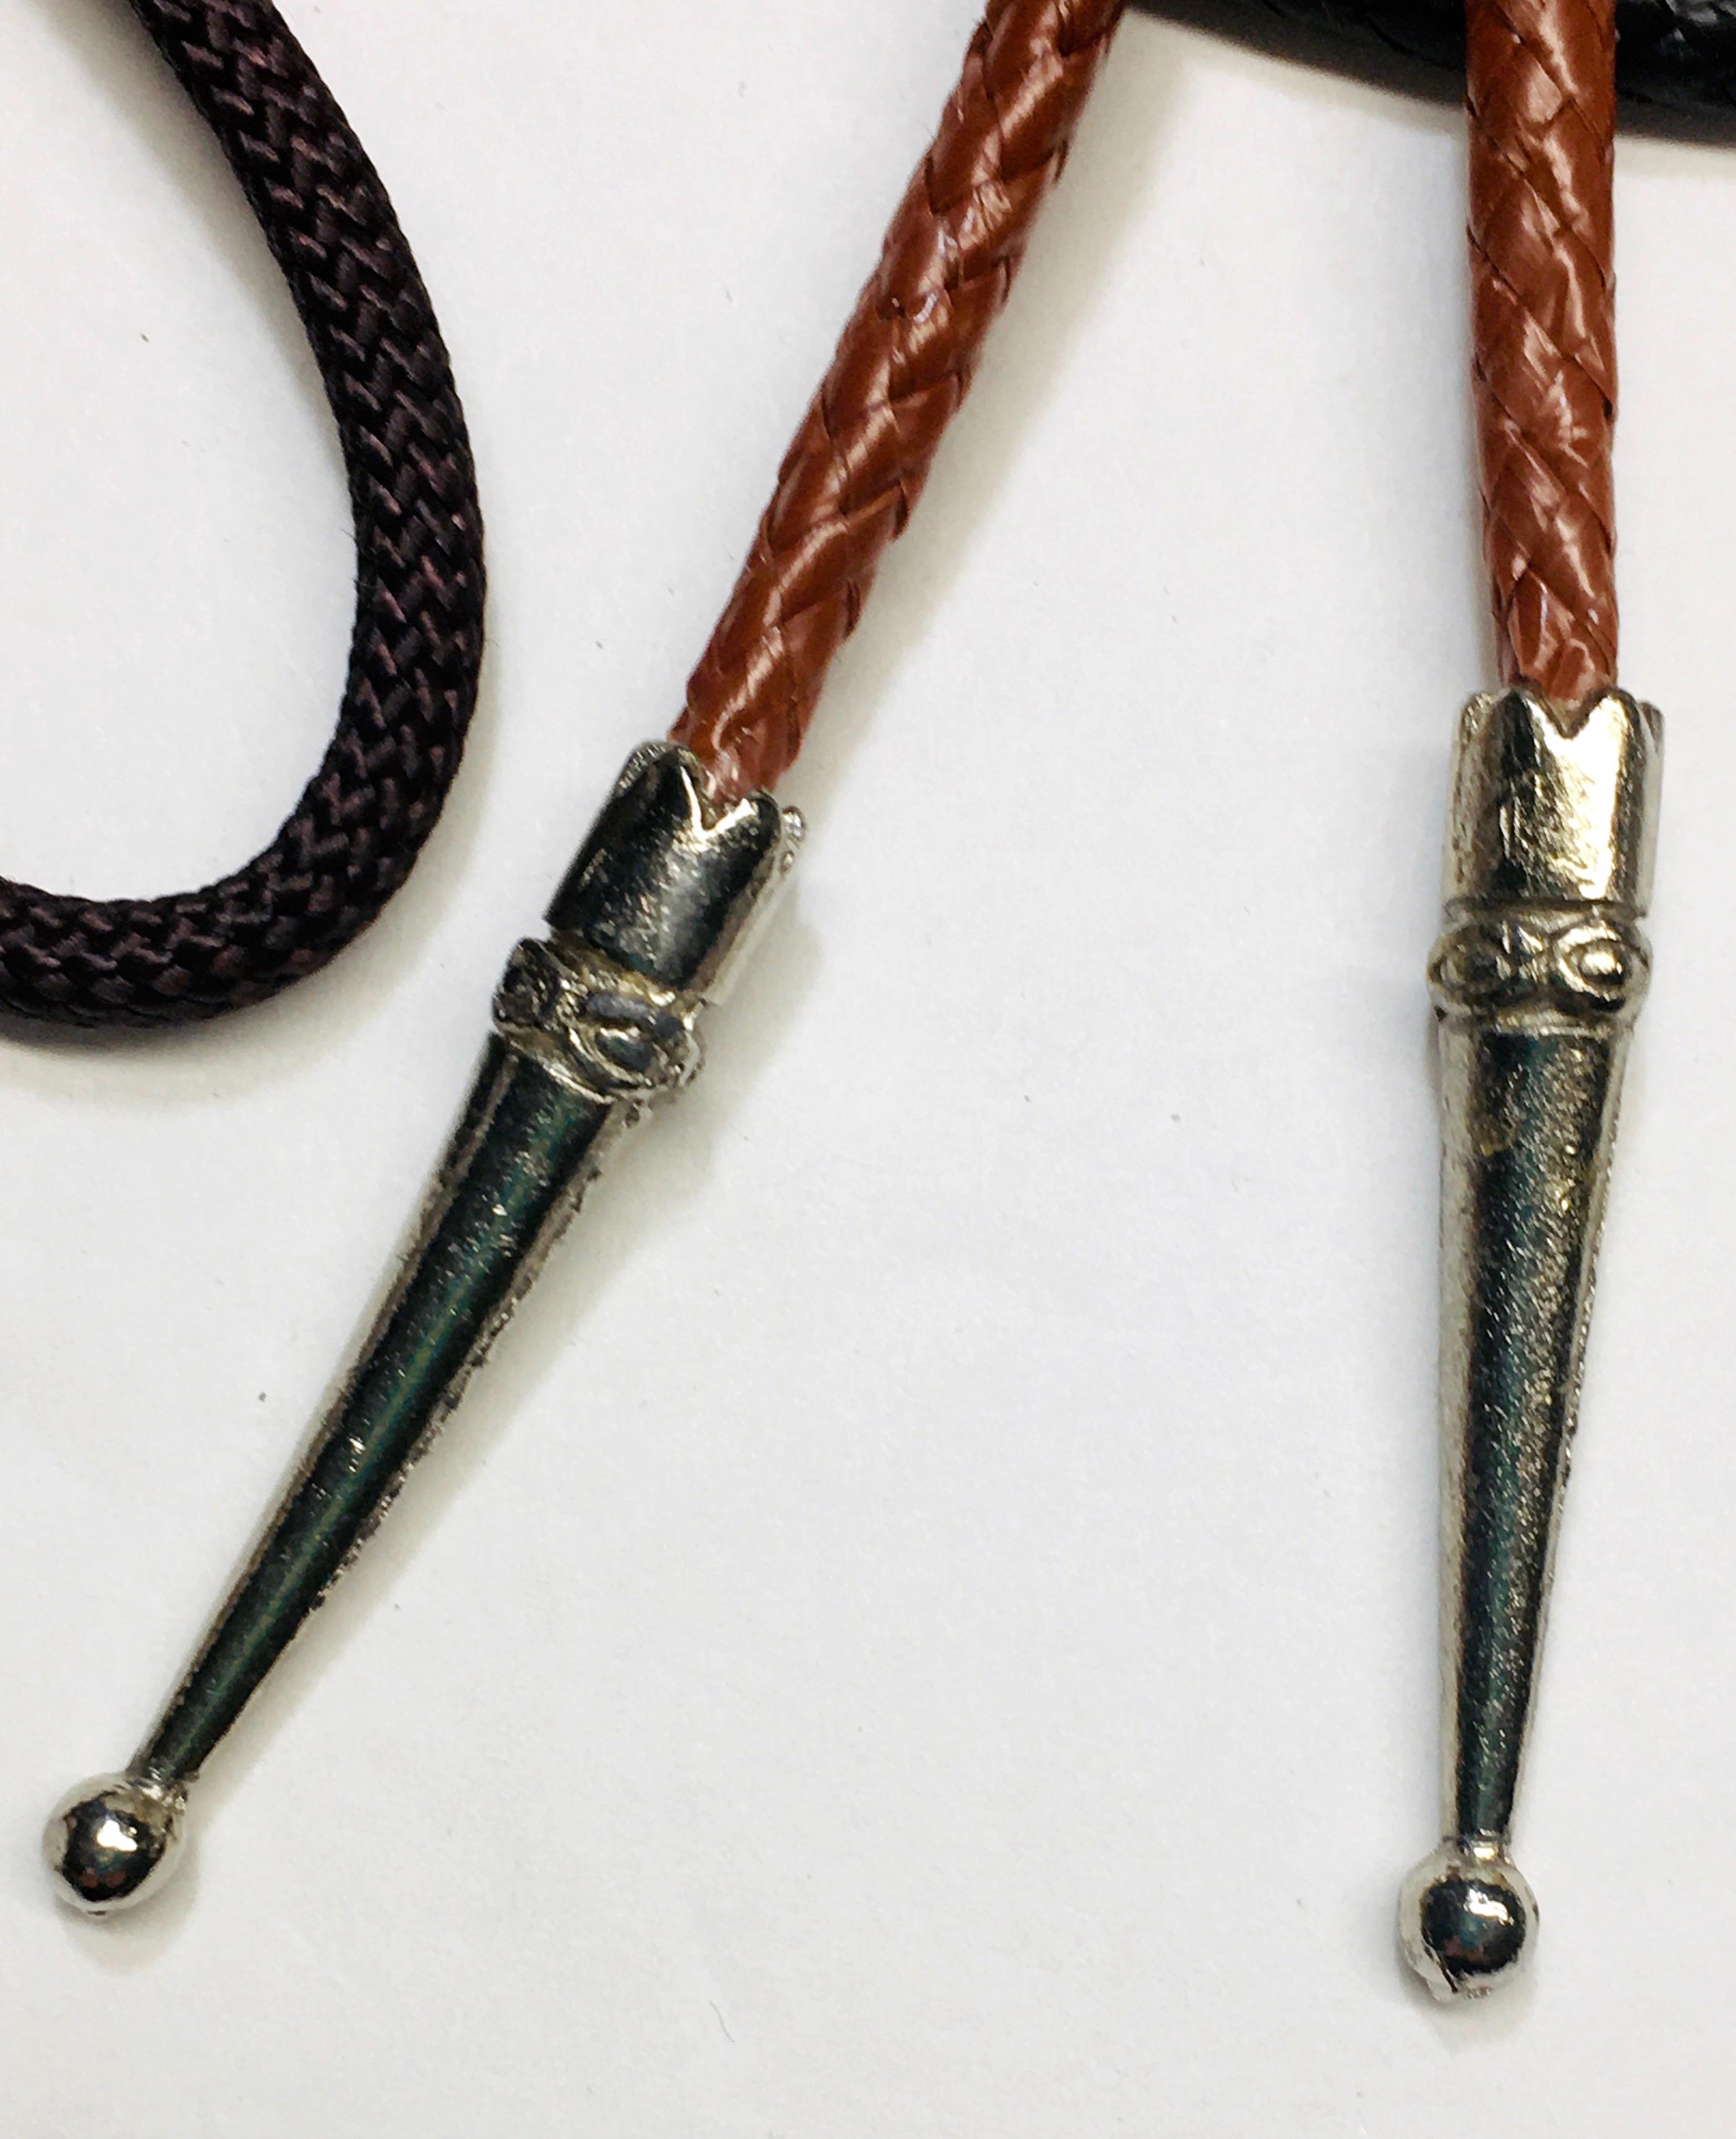 4 Vintage BOLO TIES. They are coming back in style again.